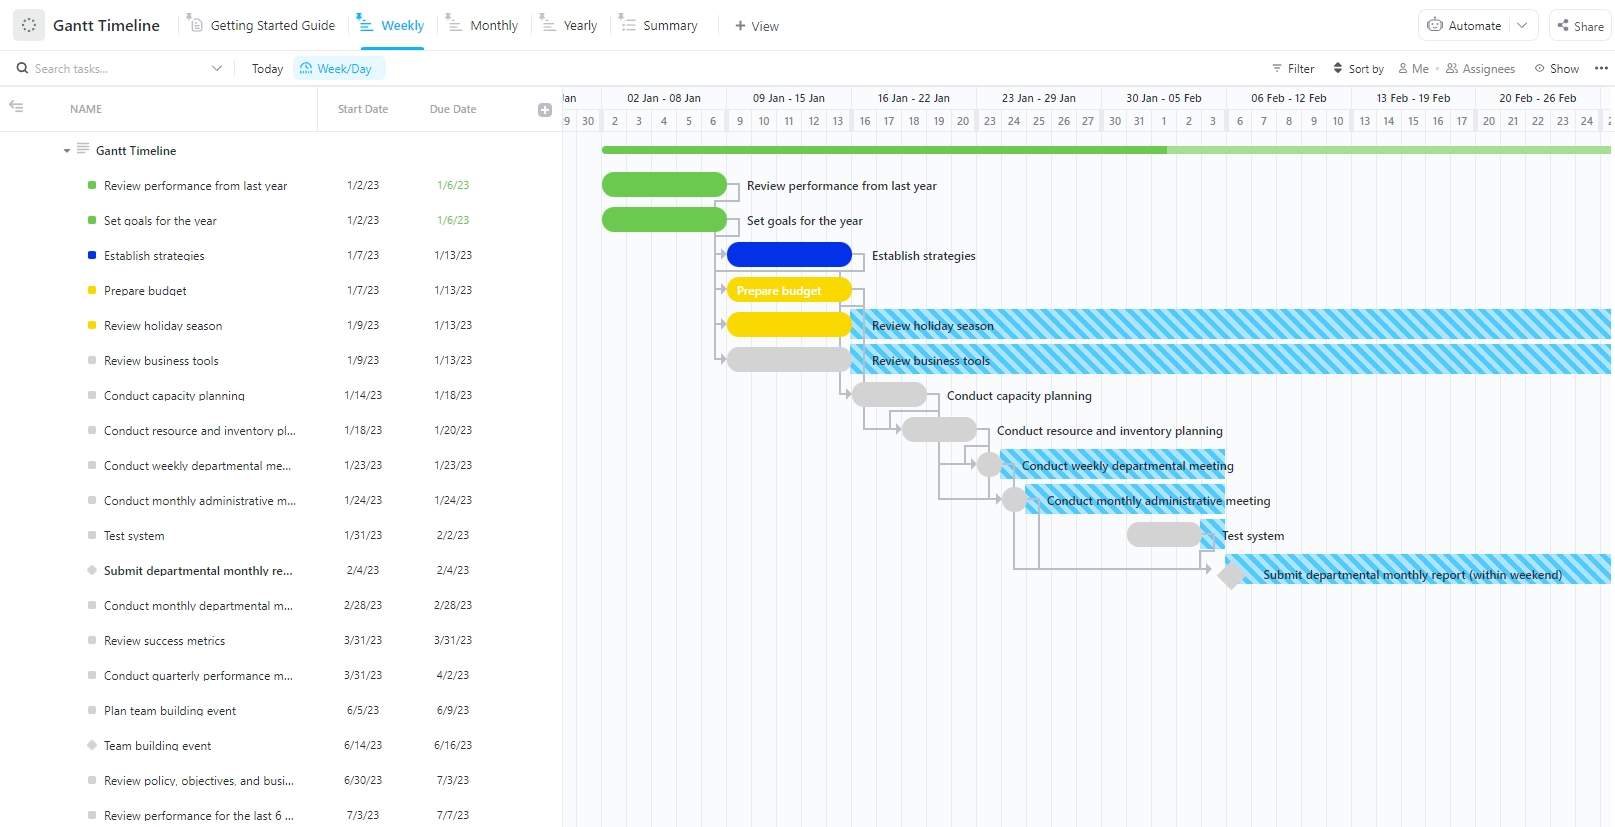 Use this Gantt Timeline template as your management tool to monitor your business operations daily. This comes with a daily, monthly, and yearly process overview.